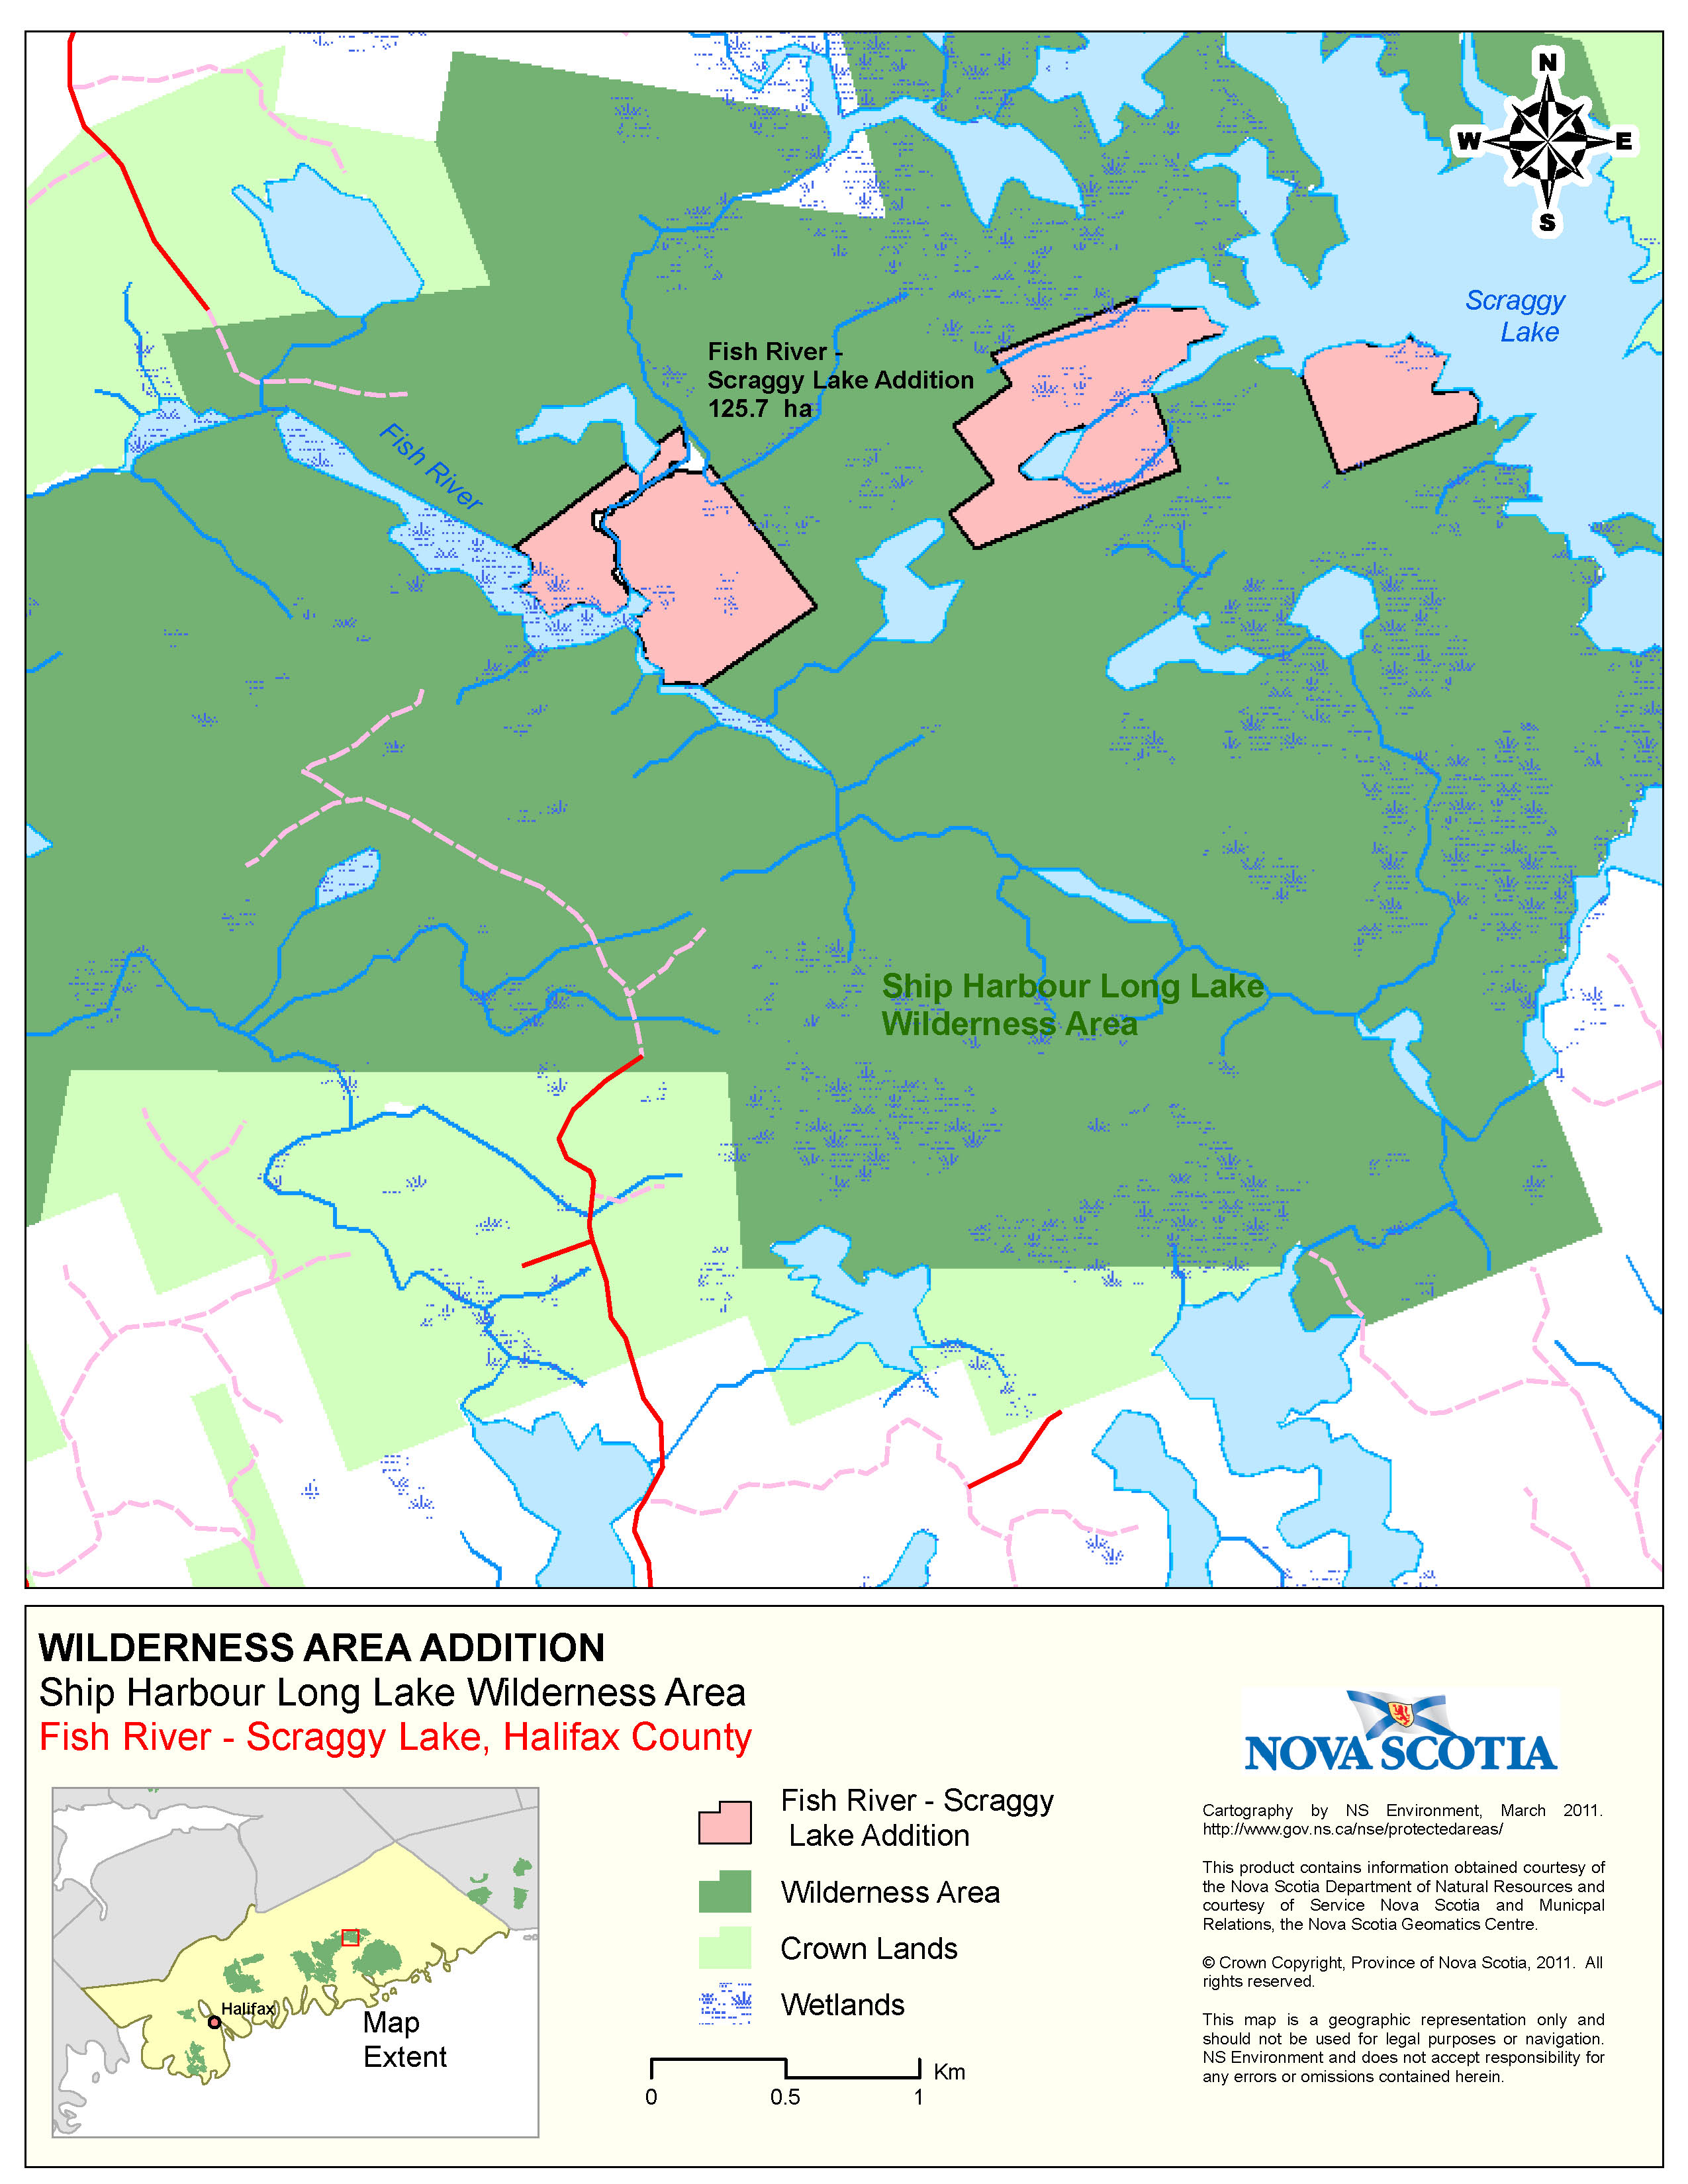 Graphic showing map of Boundaries of Crown Land at  Fish River-Scraggy Lake,
Halifax County Addition to Ship Harbour Long Lake Wilderness Area